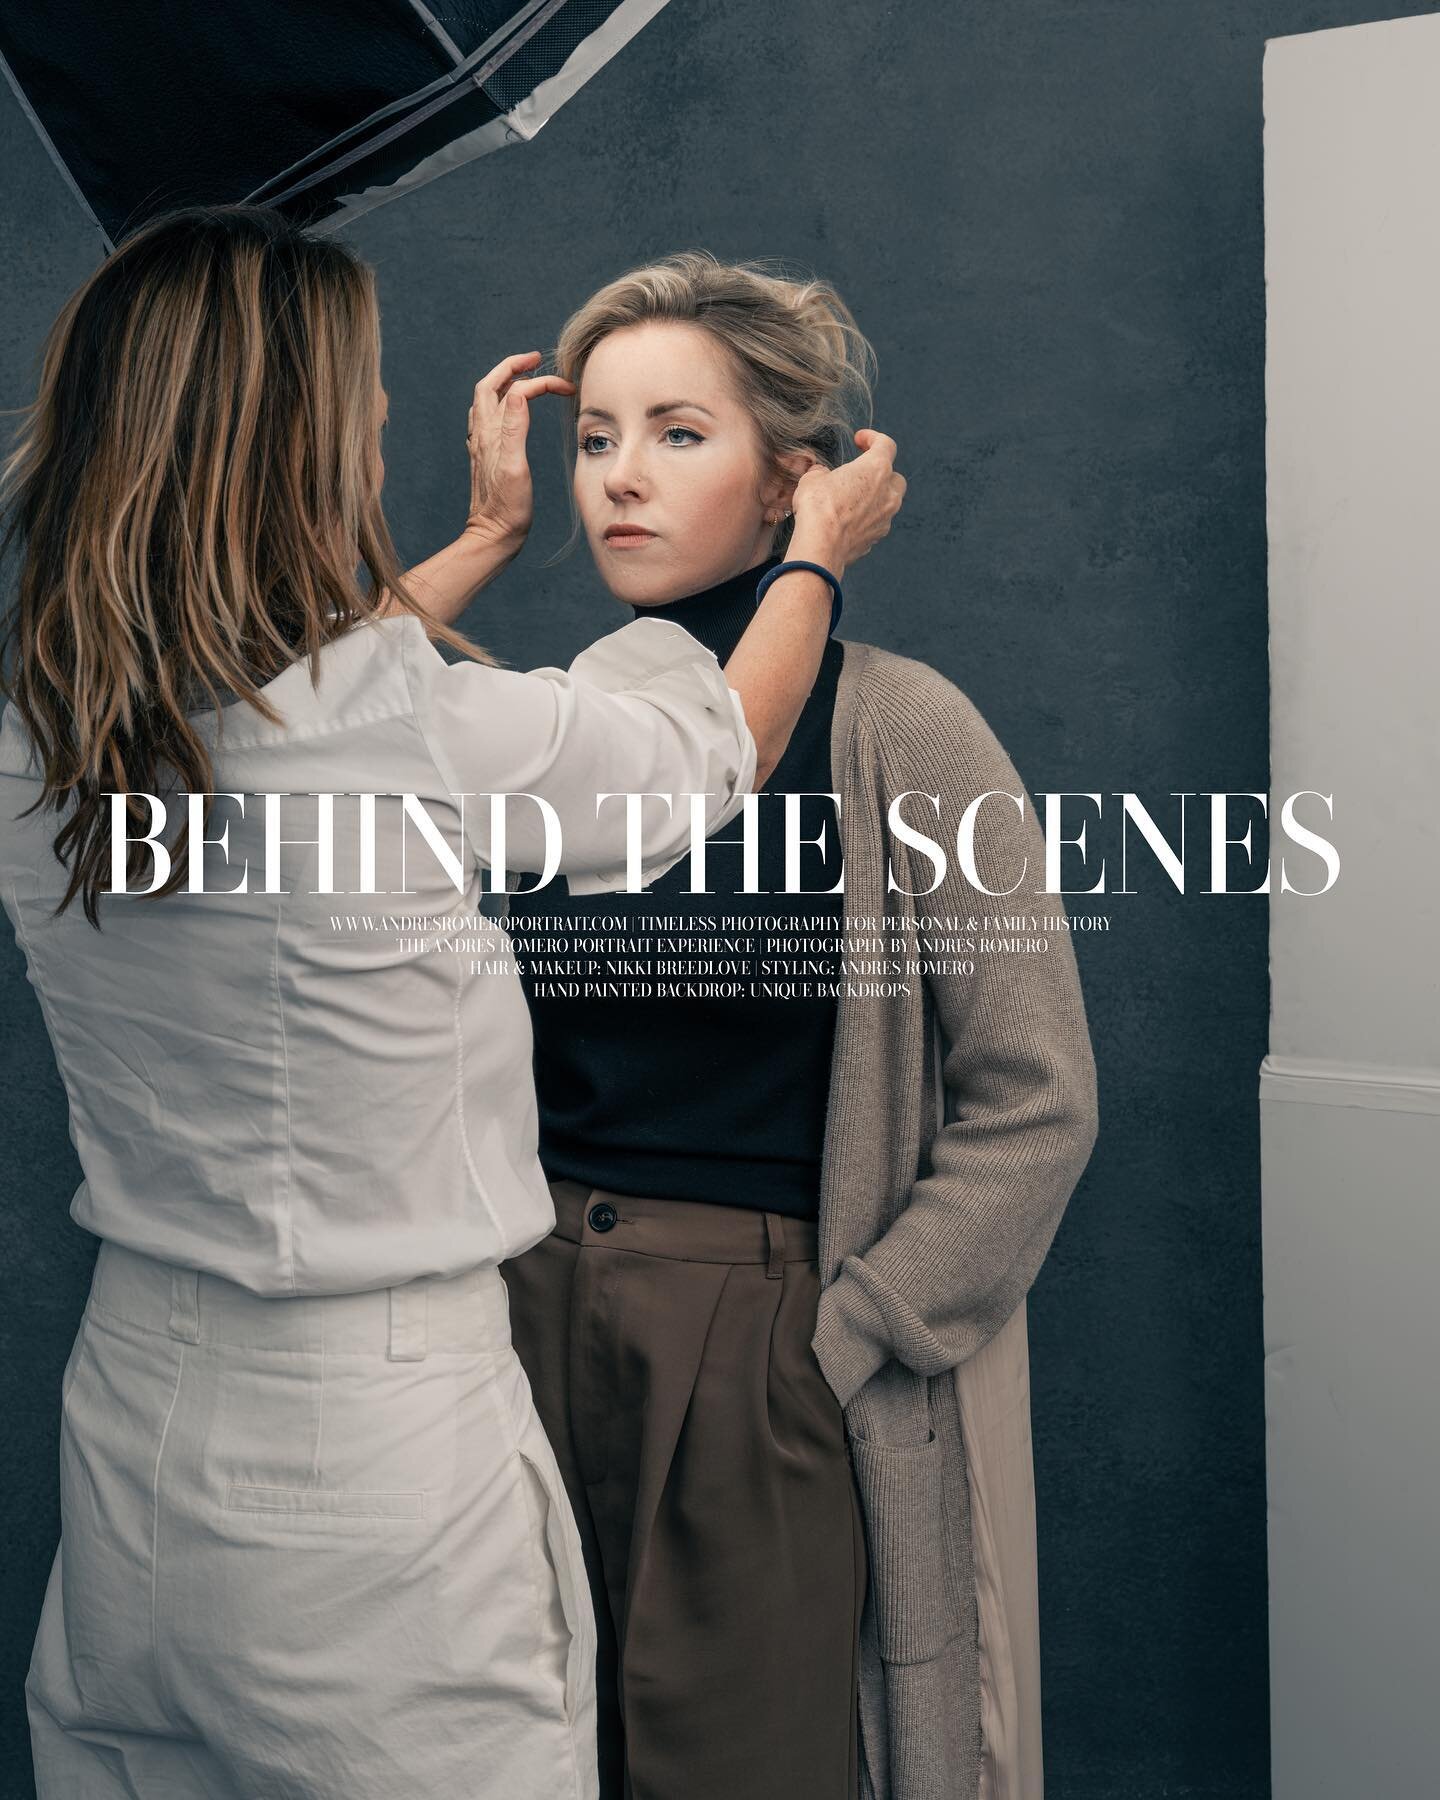 So excited to share more from this session. Here&rsquo;s a bit of behind the scenes with Nikki Breedlove working her magic. 

This set was inspired by Annie Leibovitz&rsquo;s studio portrait of Jennifer Lawrence. It&rsquo;s timeless, elegant, and suc